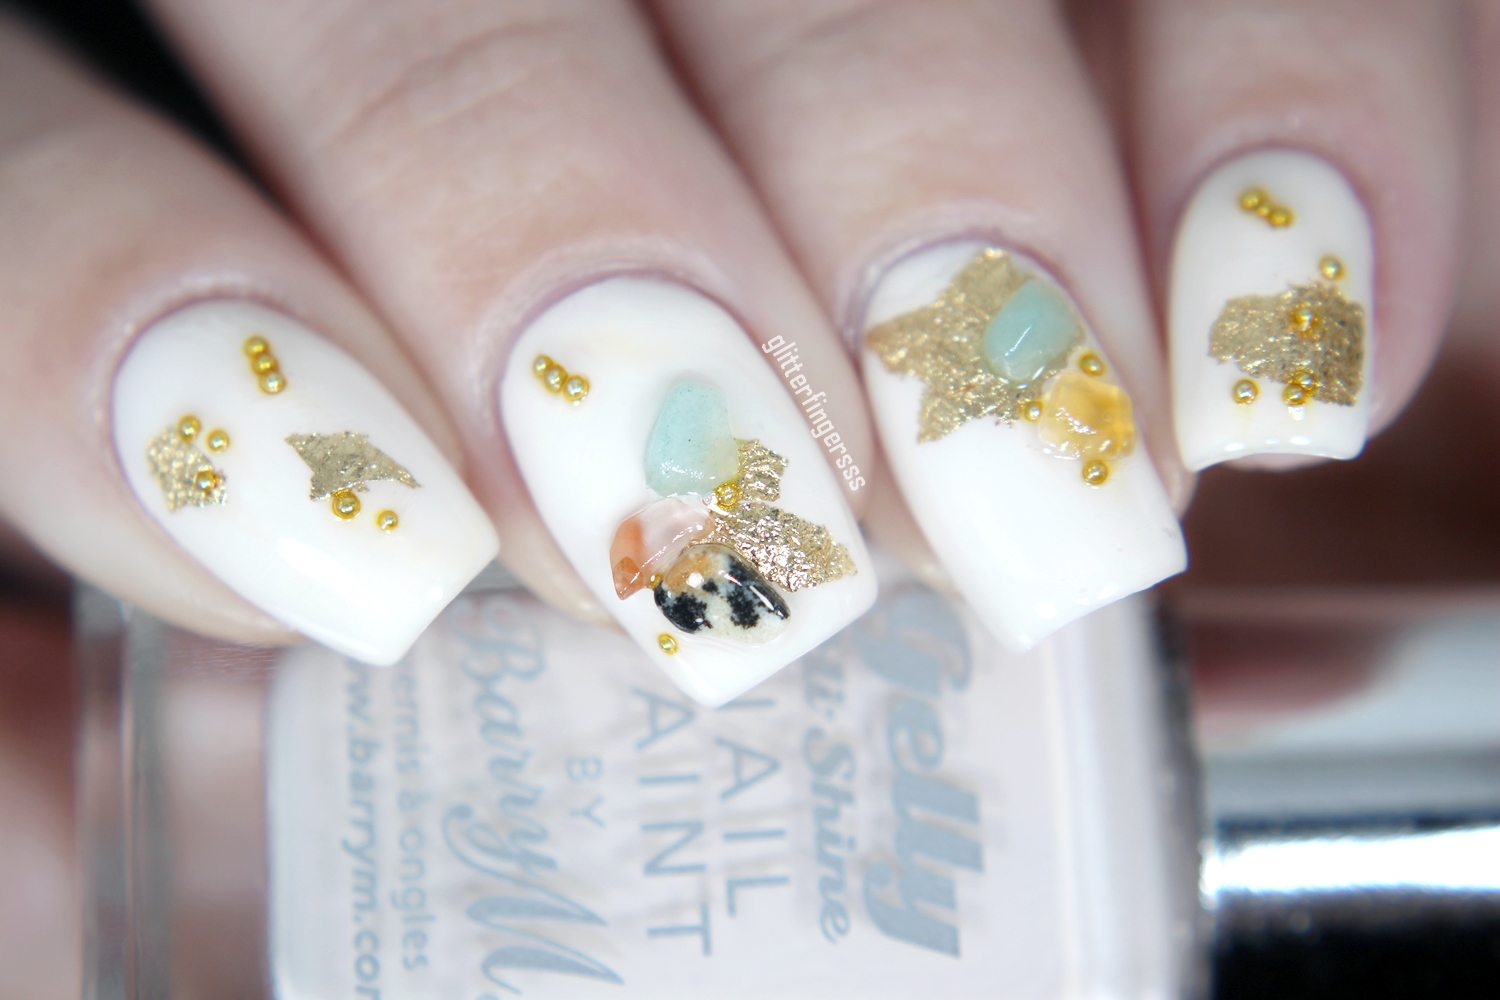 Stone Roses Nail Art Images - wide 3